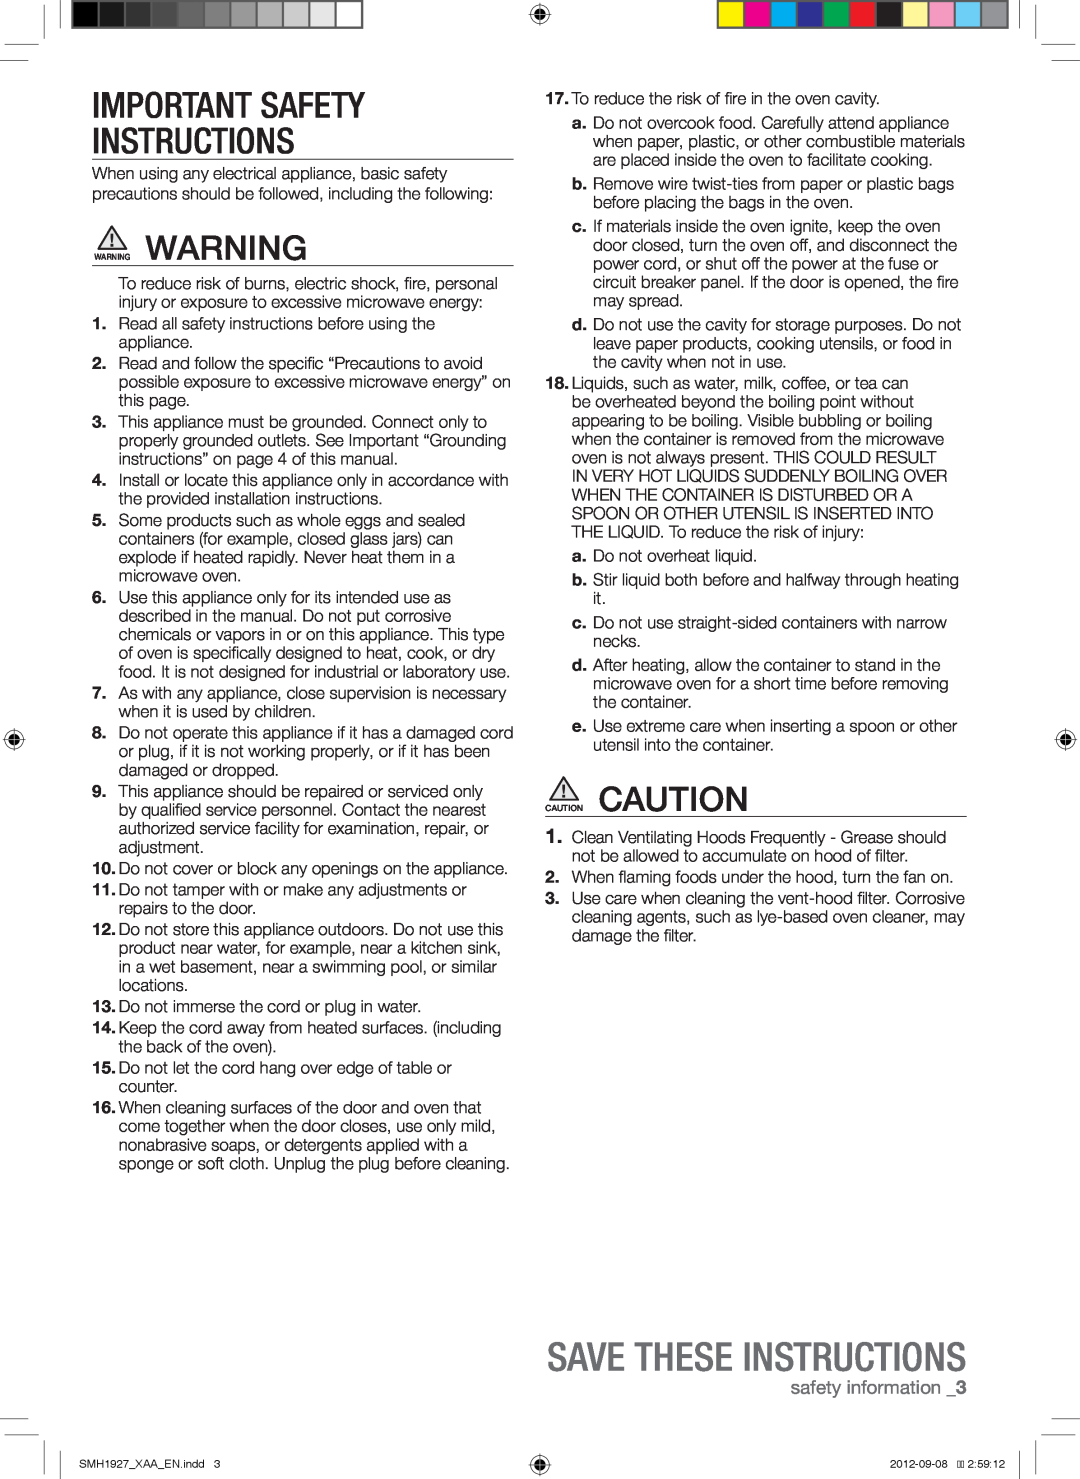 Samsung SMH1927S, SMH1927W, SMH1927B user manual Save These Instructions, Important Safety Instructions, safety information 